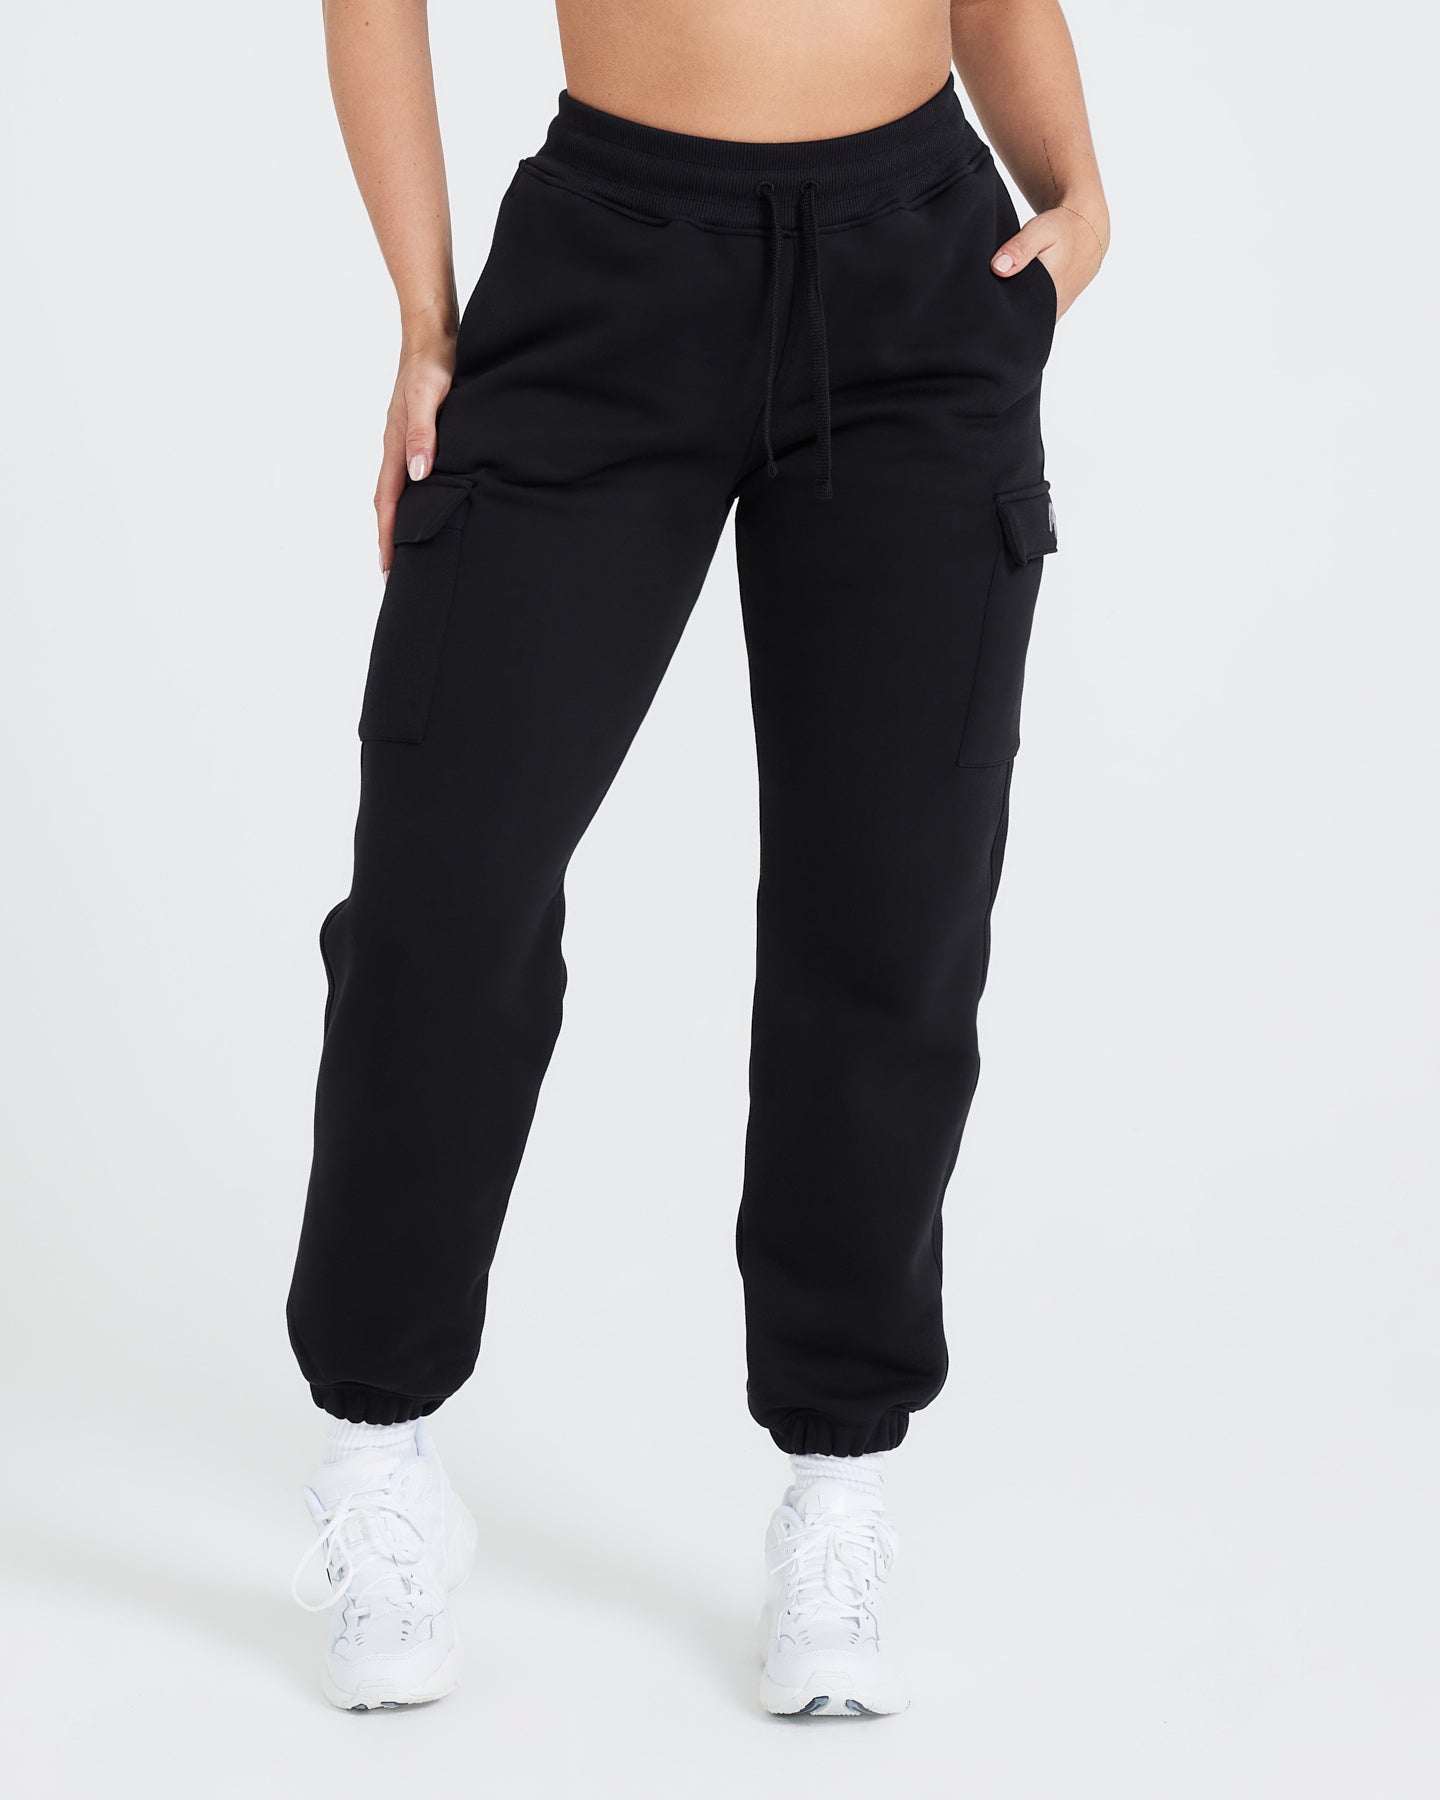 DYWER Female Cotton Blend Regular Fit Stylish Design Cargo Style Track Pant  Gym Workout Morning Walk Casual wear with Zipper Pockets. Black-S :  : Clothing & Accessories